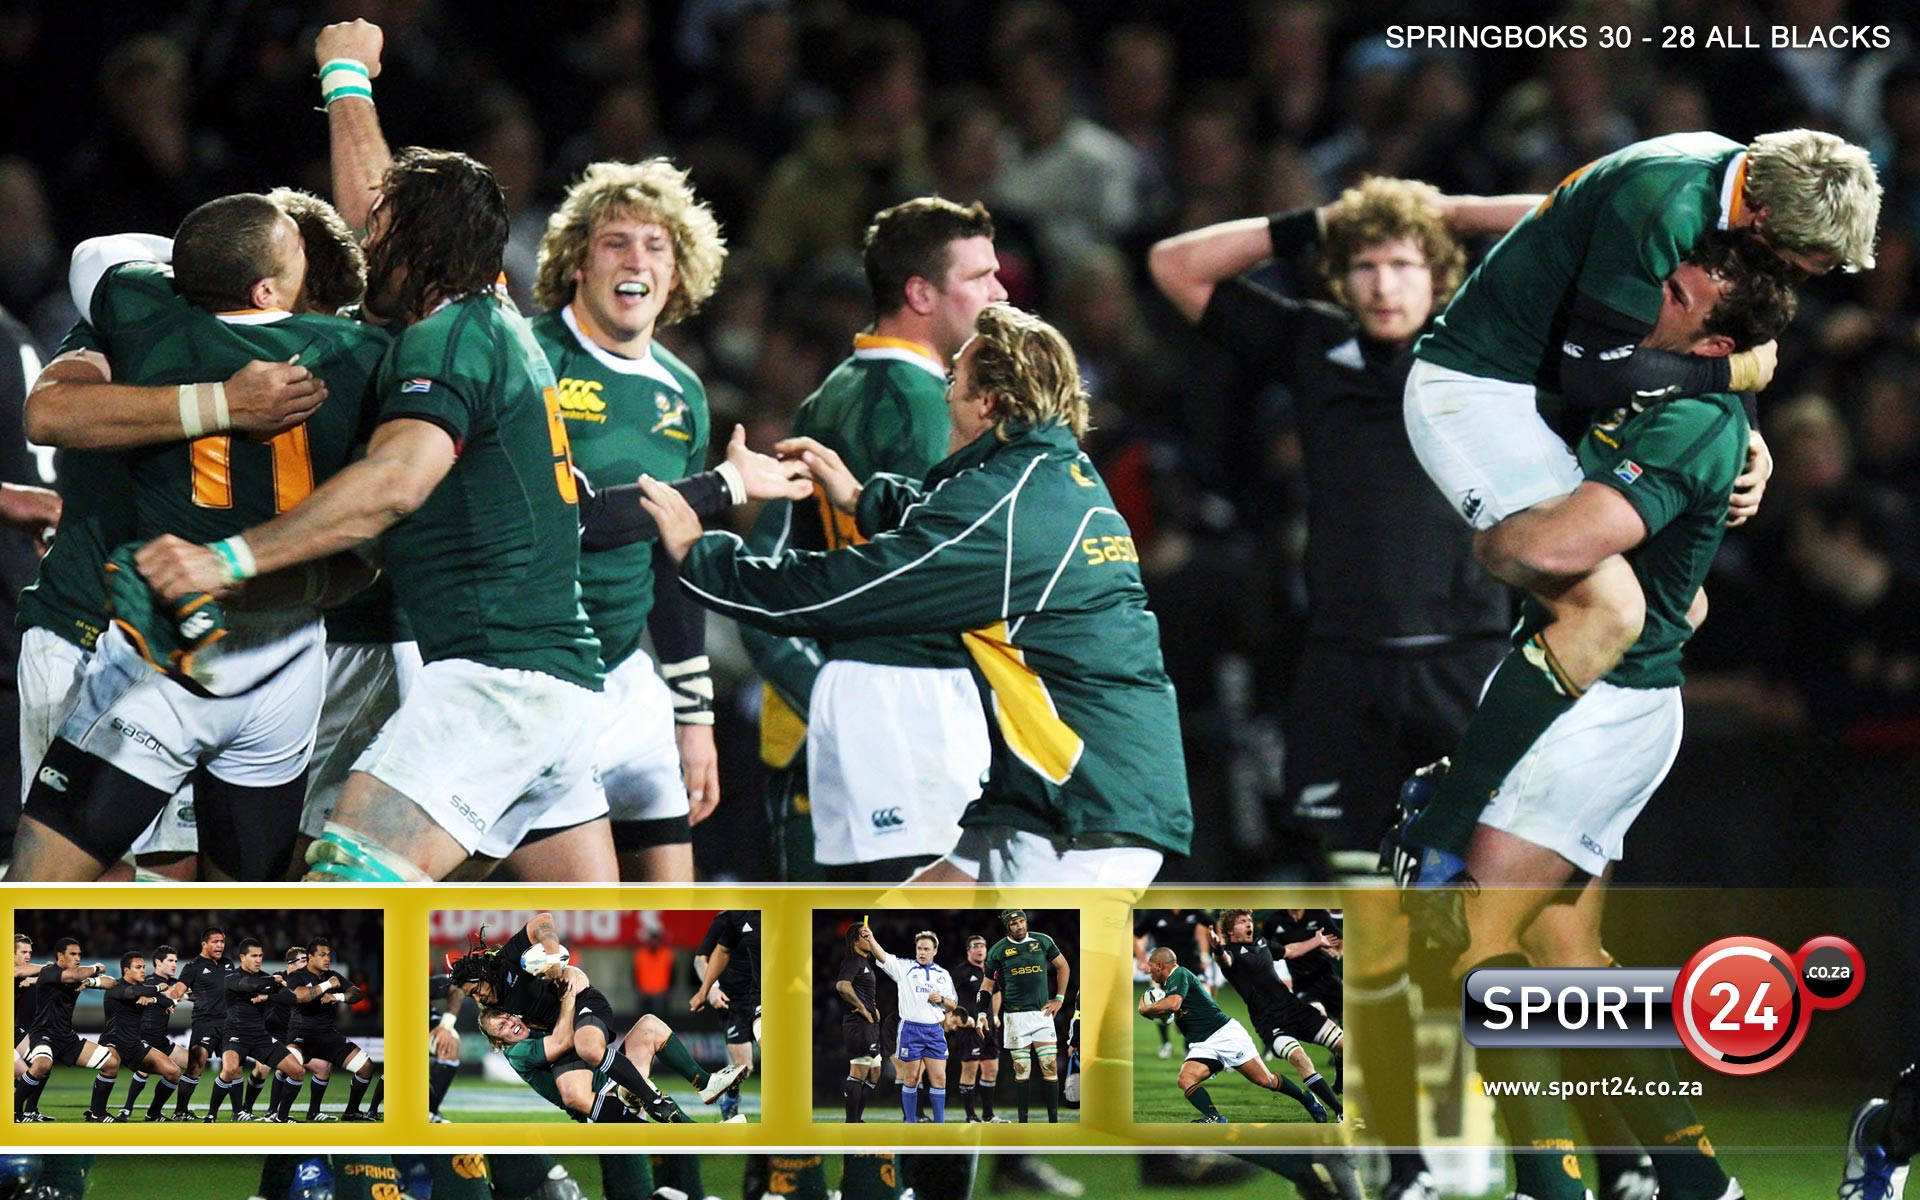 Springboks Rugby 2007 Champions Background